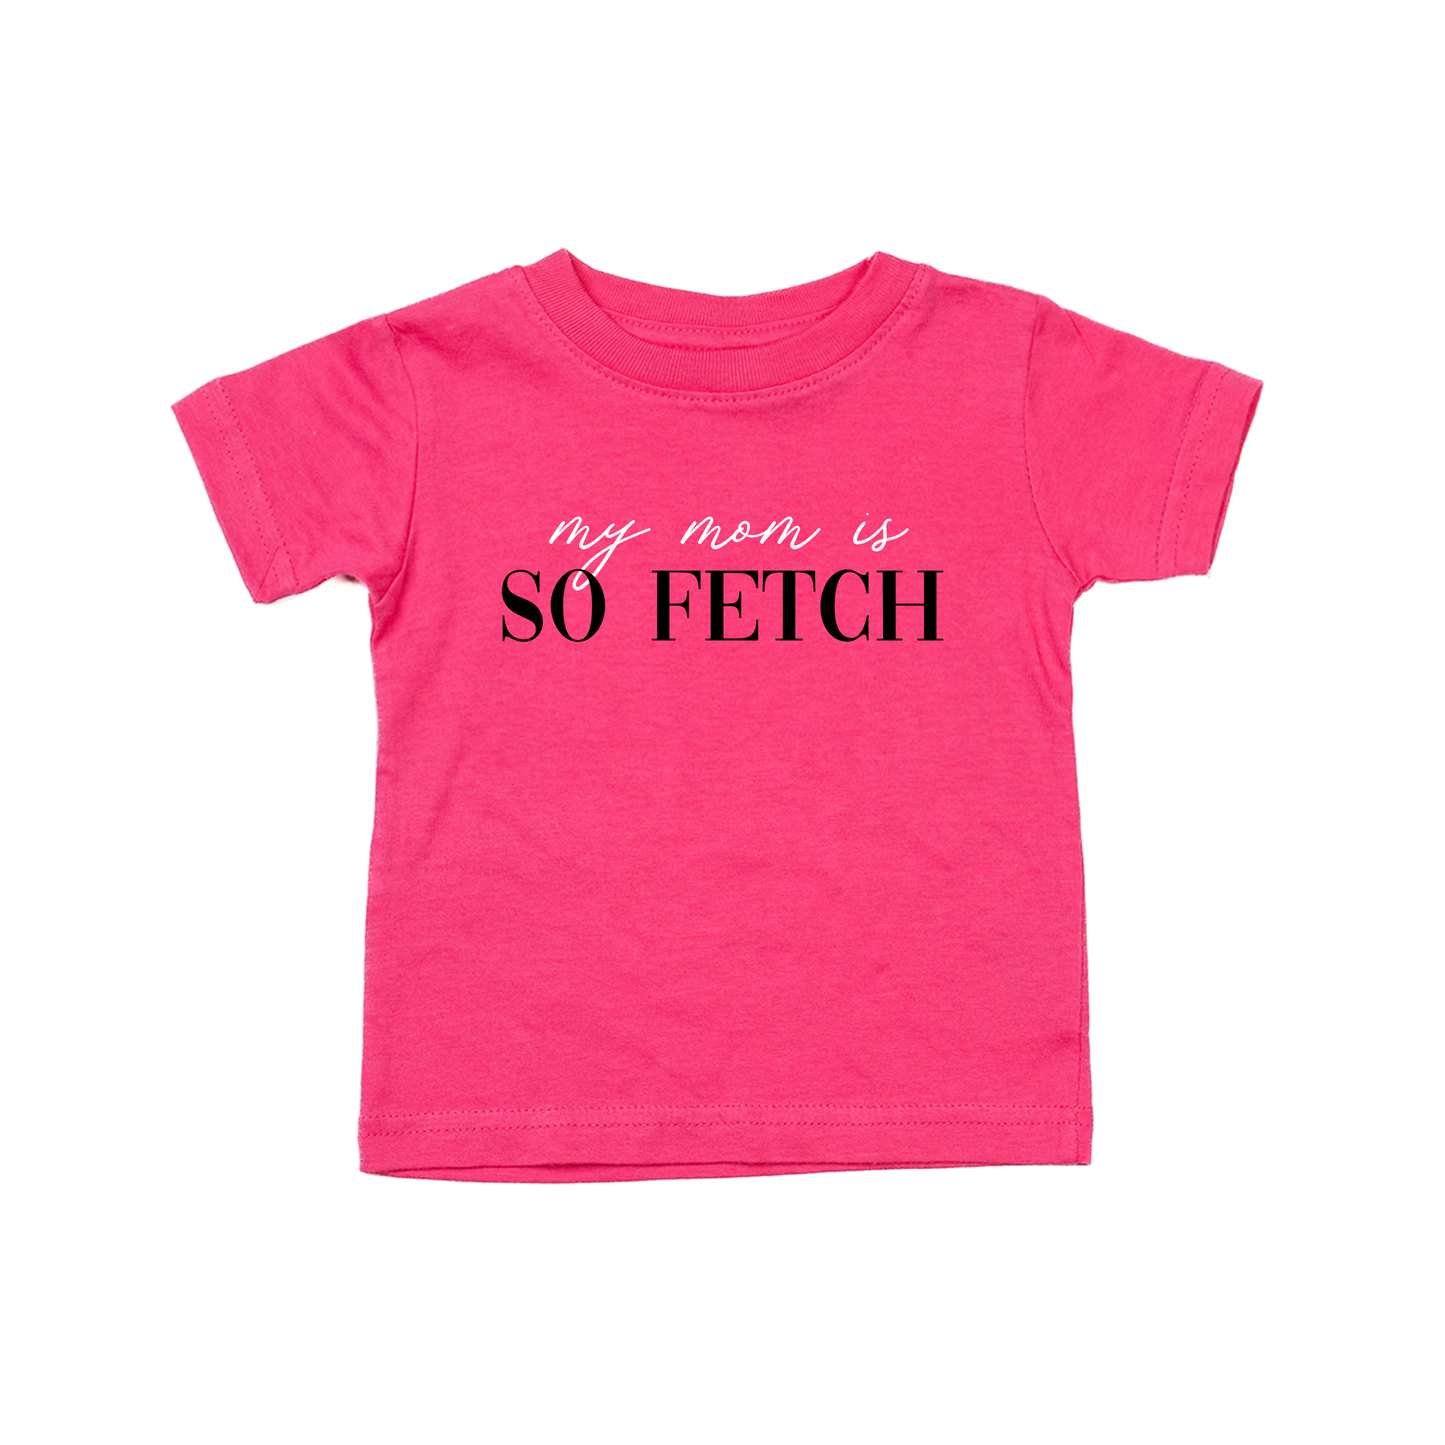 My Mom Is So Fetch - Kids Tee (Hot Pink)